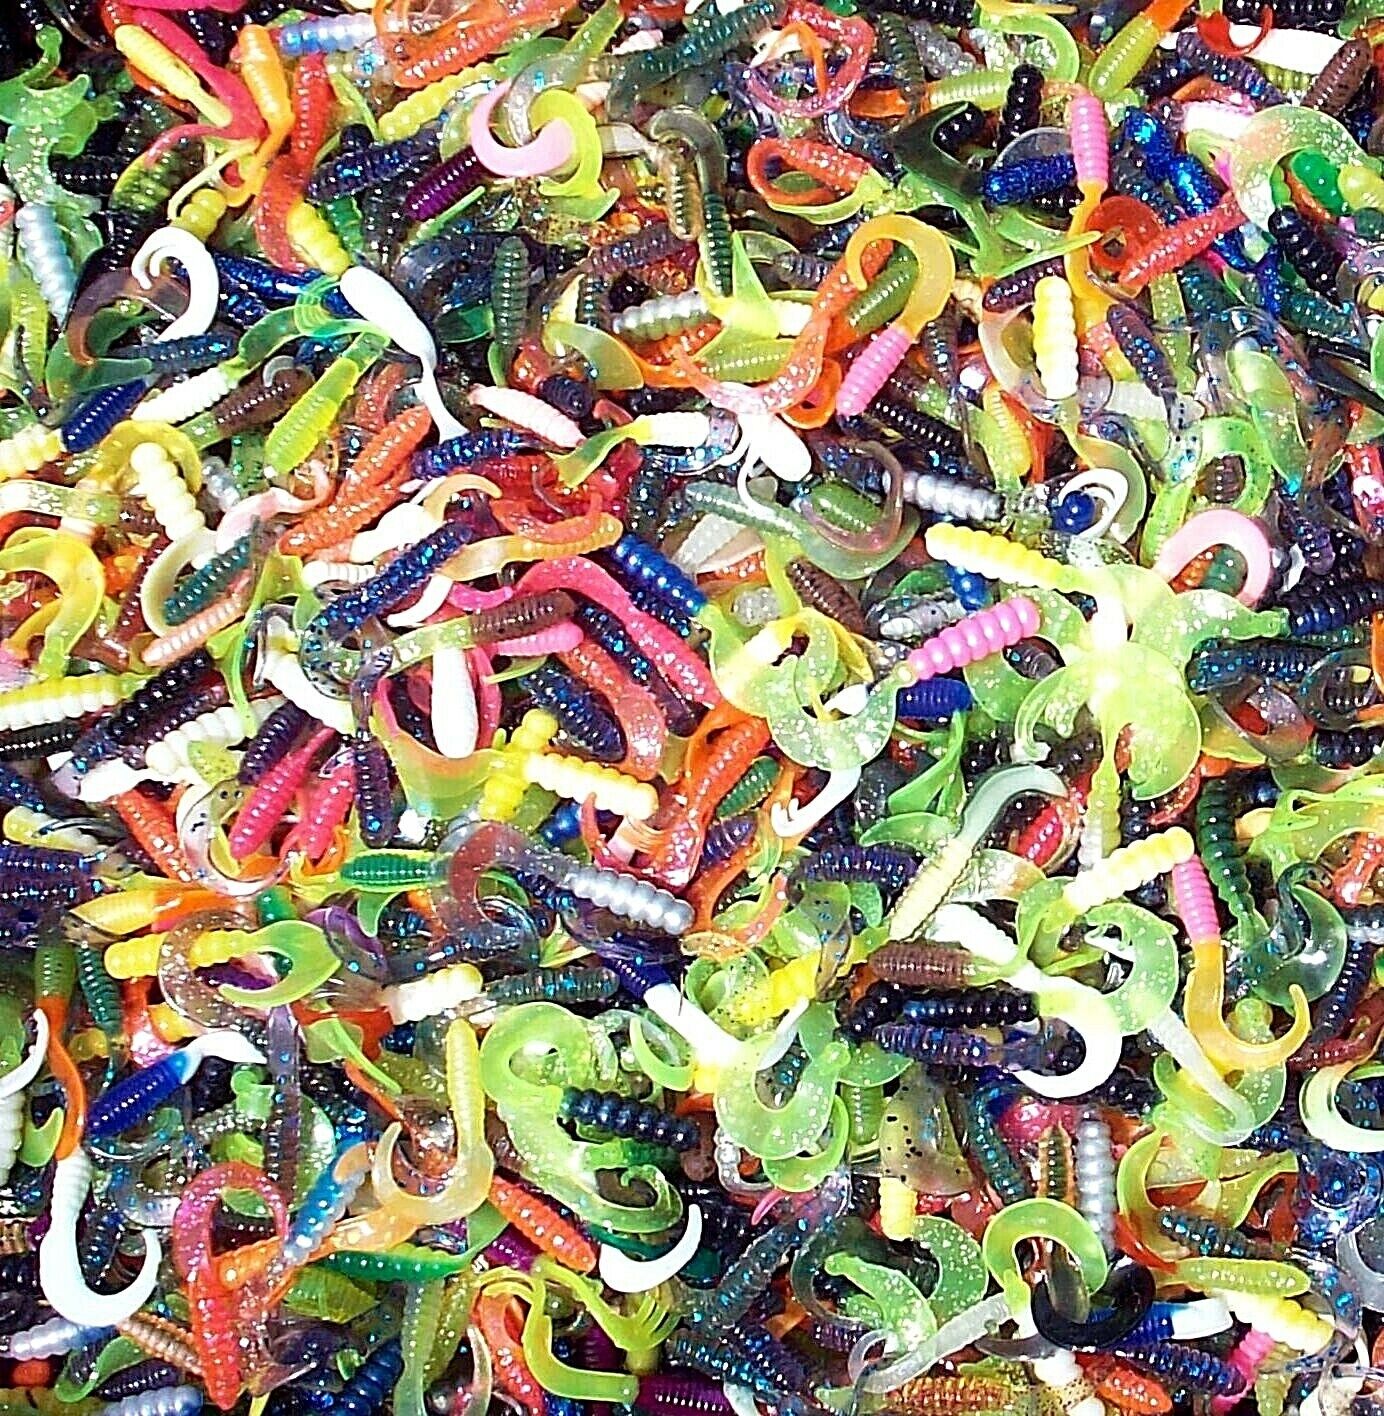 100 ASSORTED 2" Curly Tail GRUBS Crappie Fishing Lures Trout Panfish Perch Baits All American Tournament Quality Soft Plastic Baits 2CTGrubs.Asst100ct - фотография #5